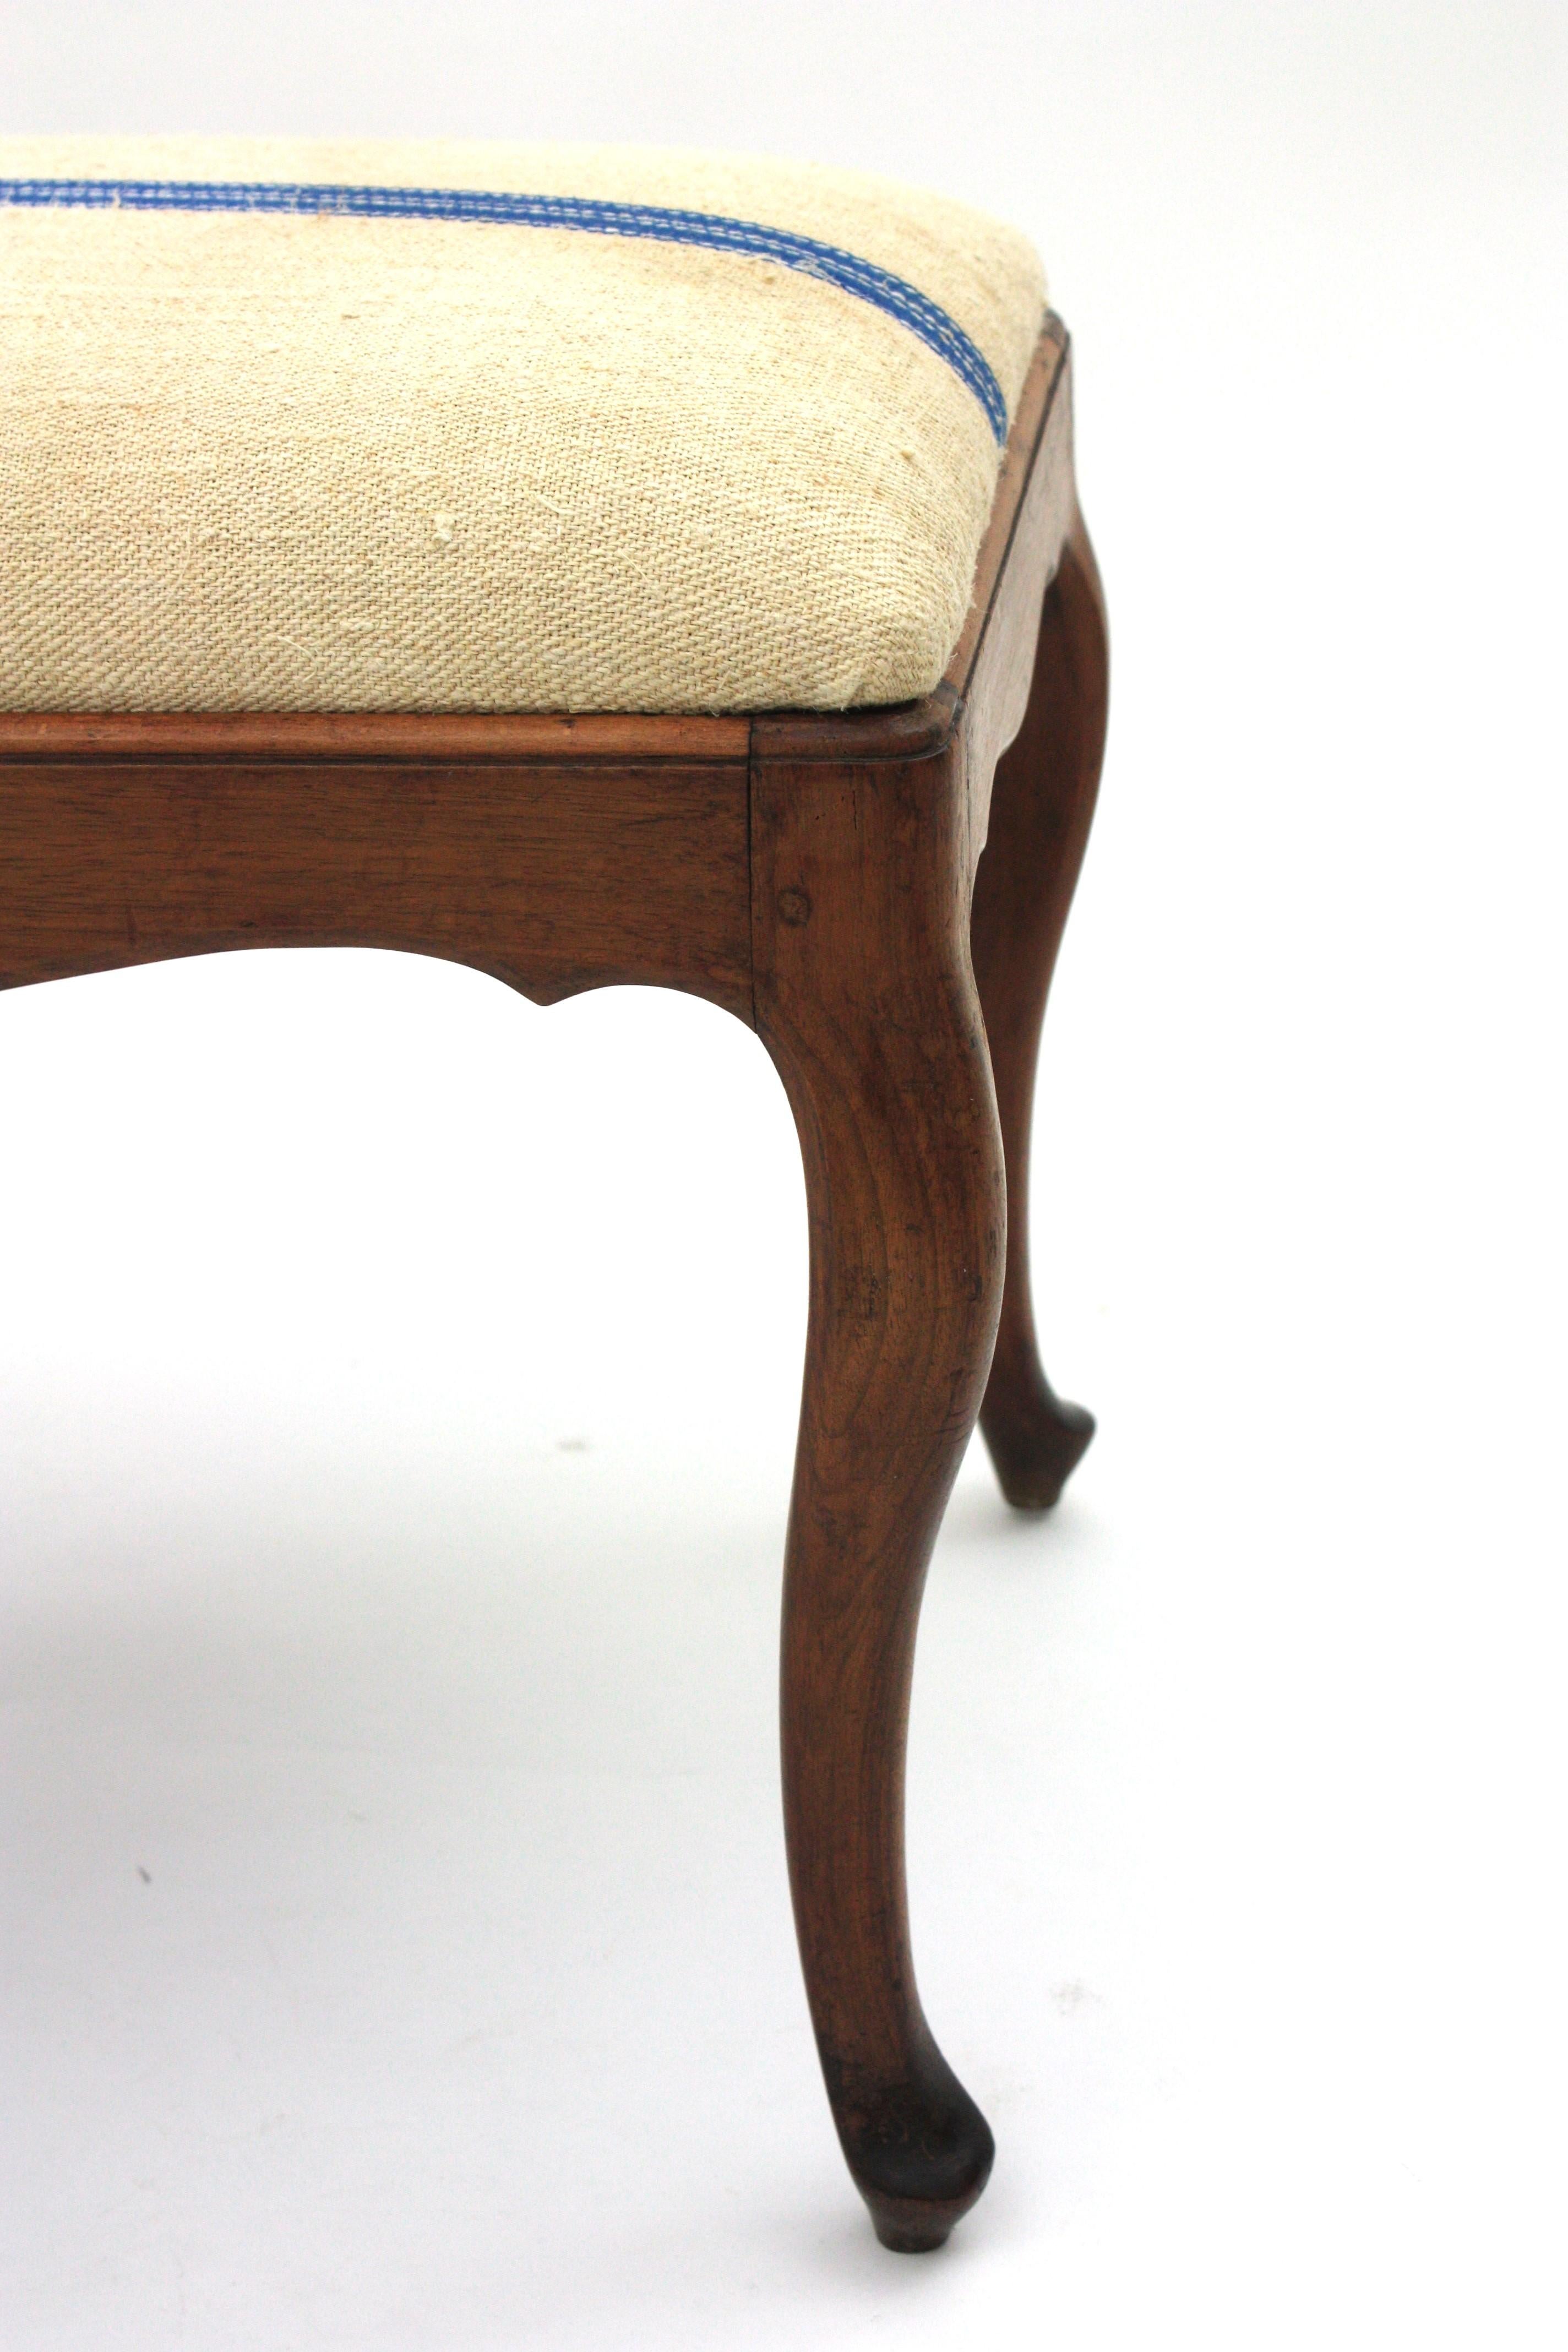 Bench Ottoman Stool in Walnut New Upholstered in Vintage French Linen For Sale 4